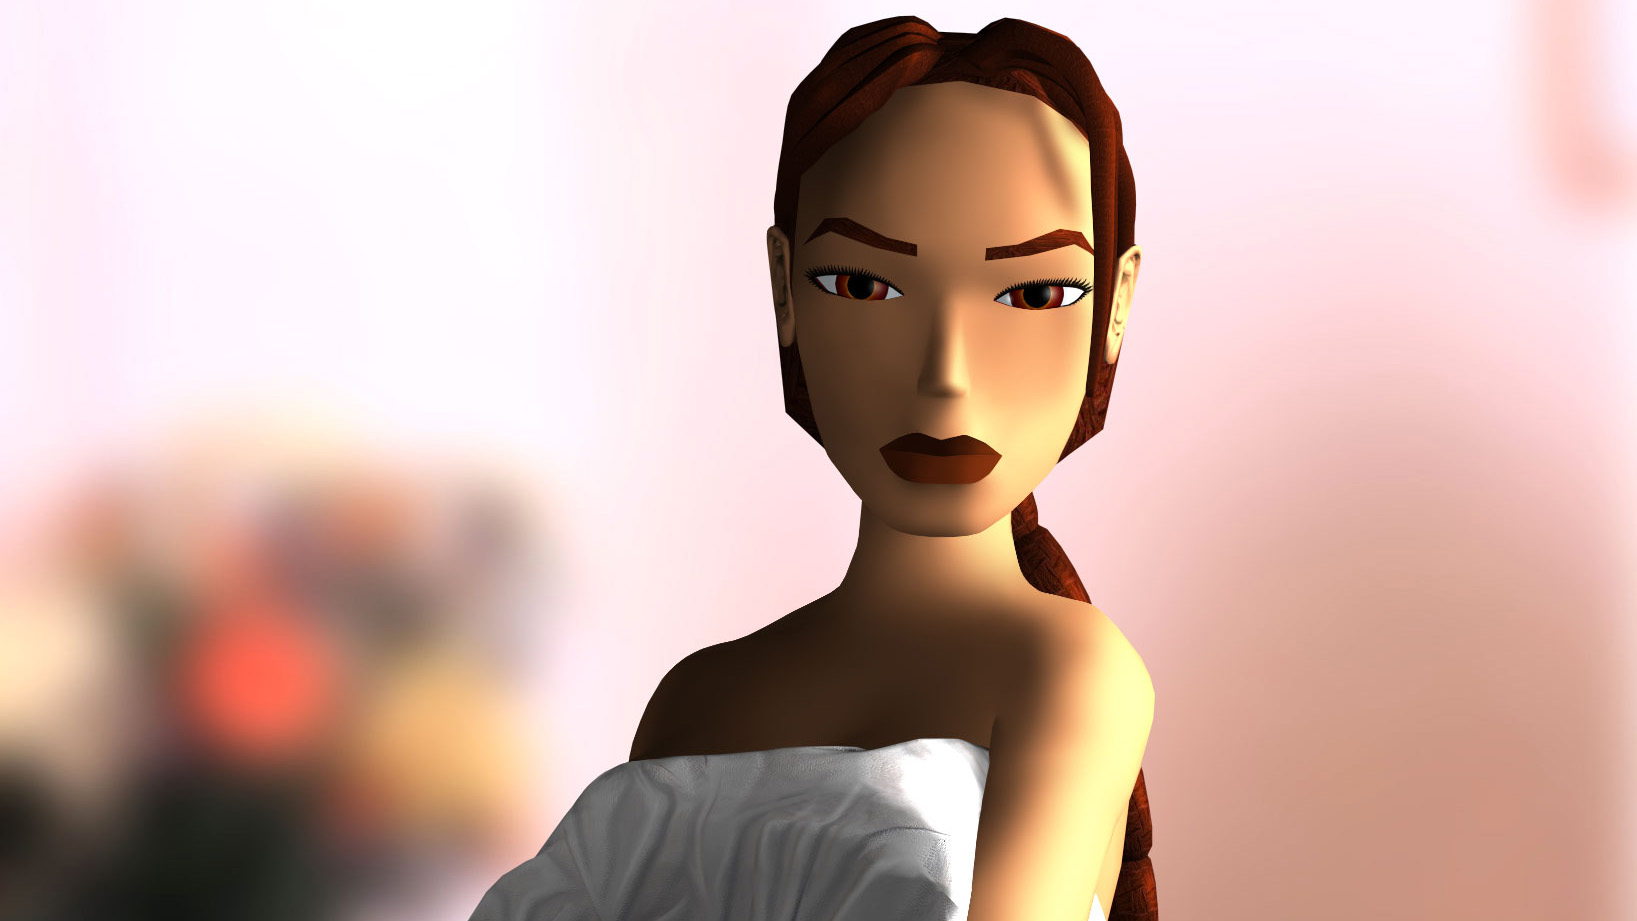  Lara Croft: The Art of Virtual Seduction is the ultimate cringey relic of late '90s game advertising 